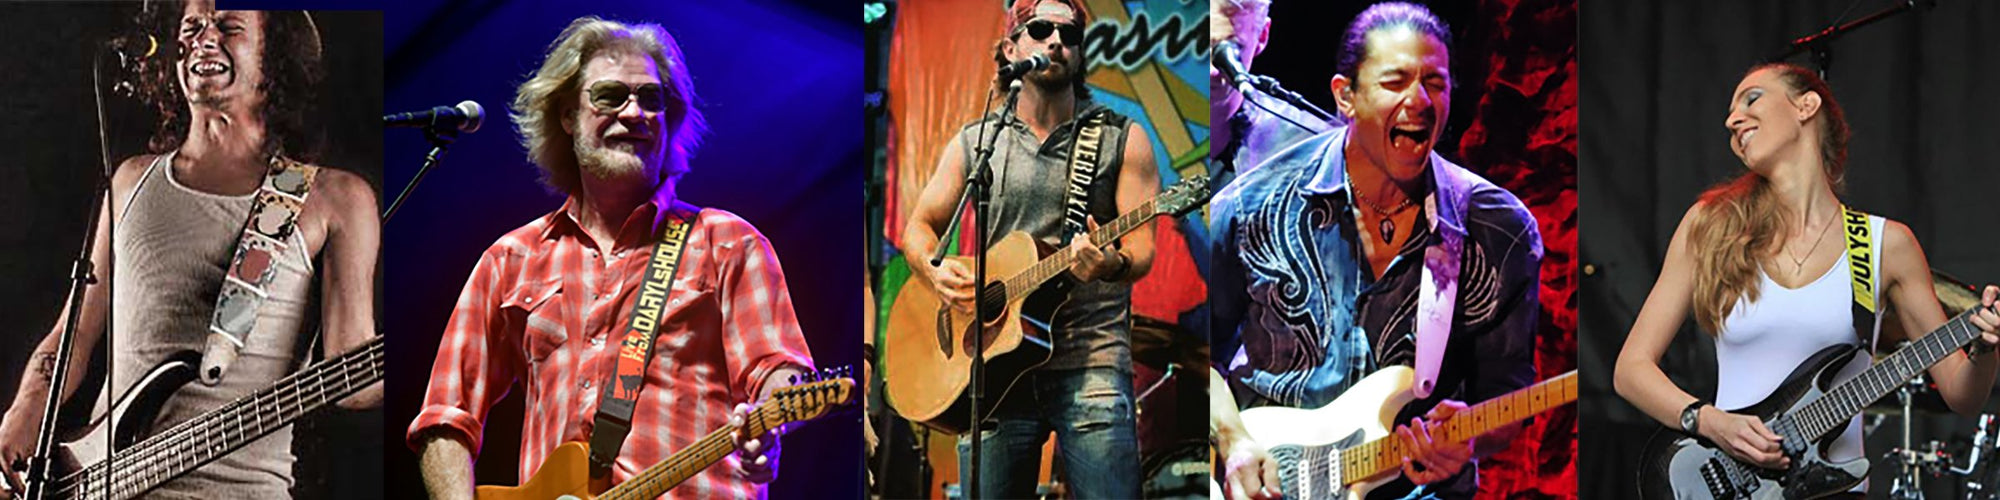 Image of guitar players showing off their personalized style with guitar straps from StrapGraphics custom guitar straps.